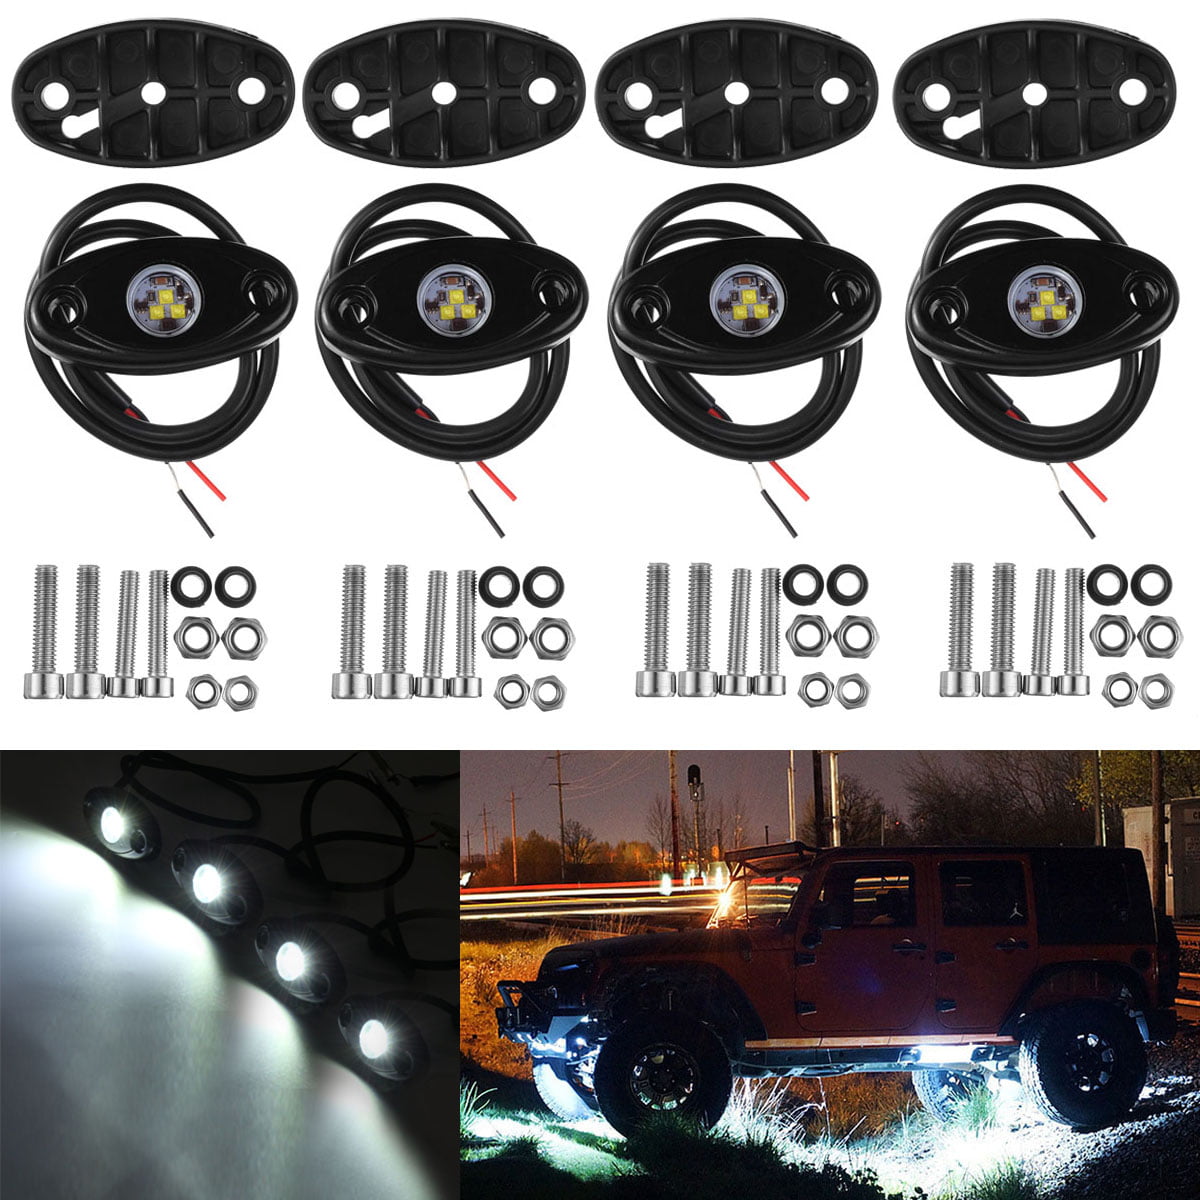 10x 9W CREE LED Rock Light White for Car Truck Boat Under Body Trail Rig Lamps 